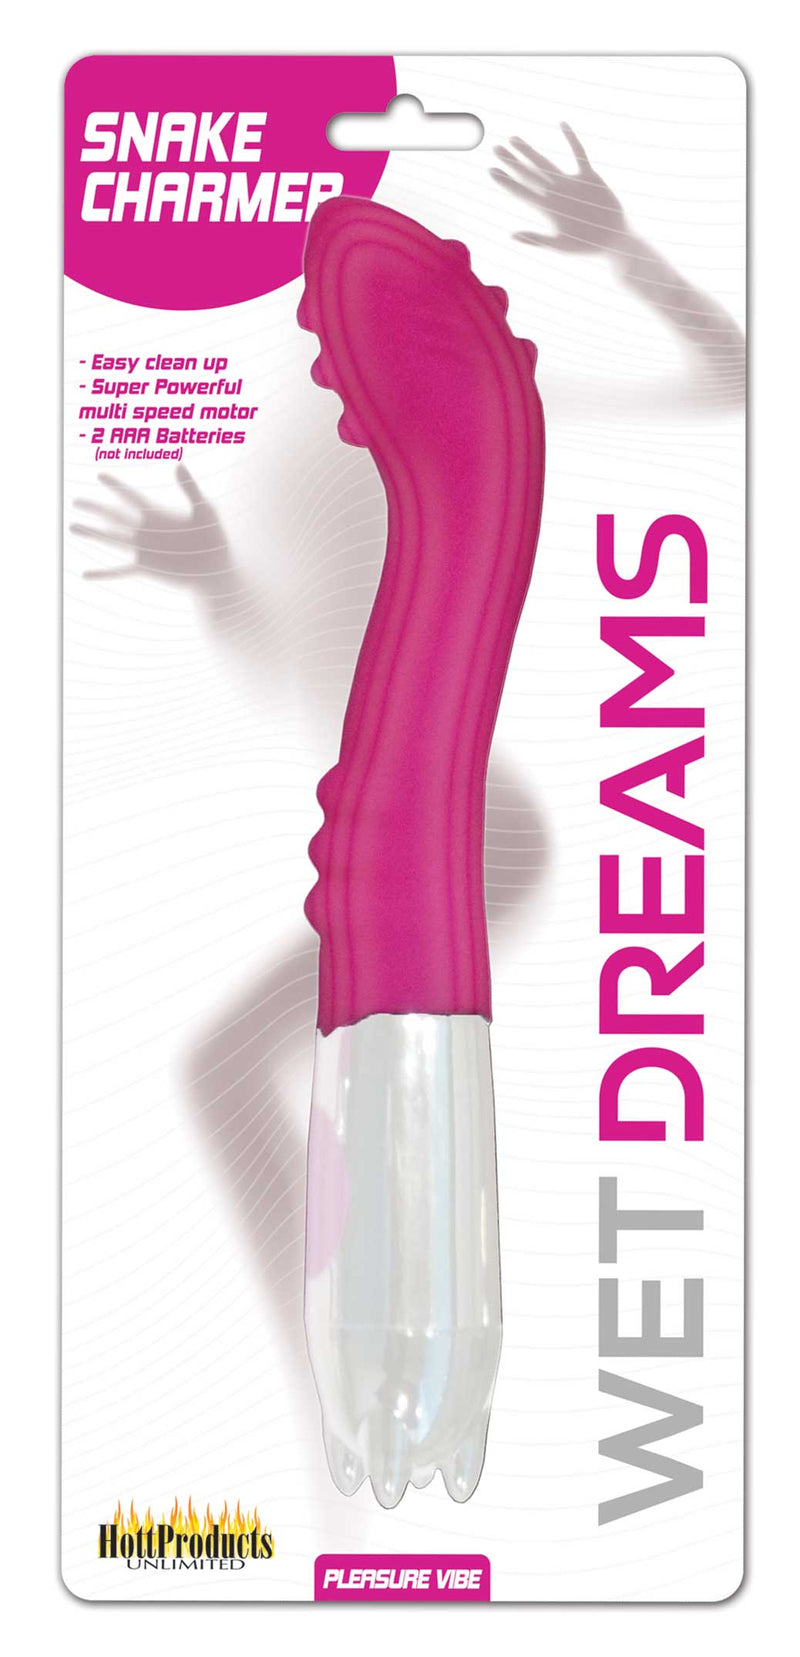 Experience Ultimate Pleasure with the Snake Charmer Multi-Speed Vibrator